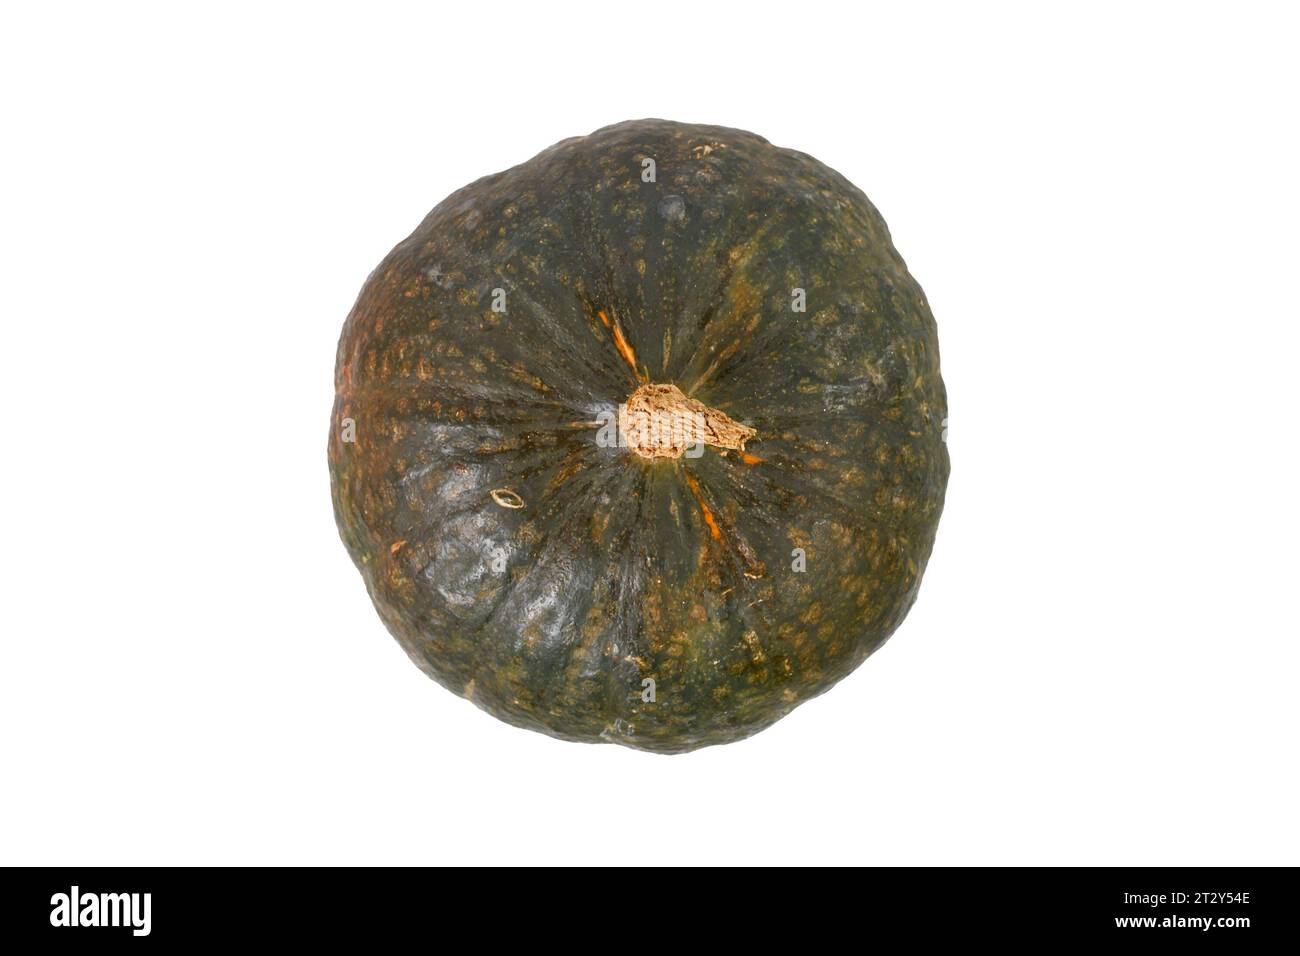 Top view of green Japanese Kabocha squash on white background Stock Photo